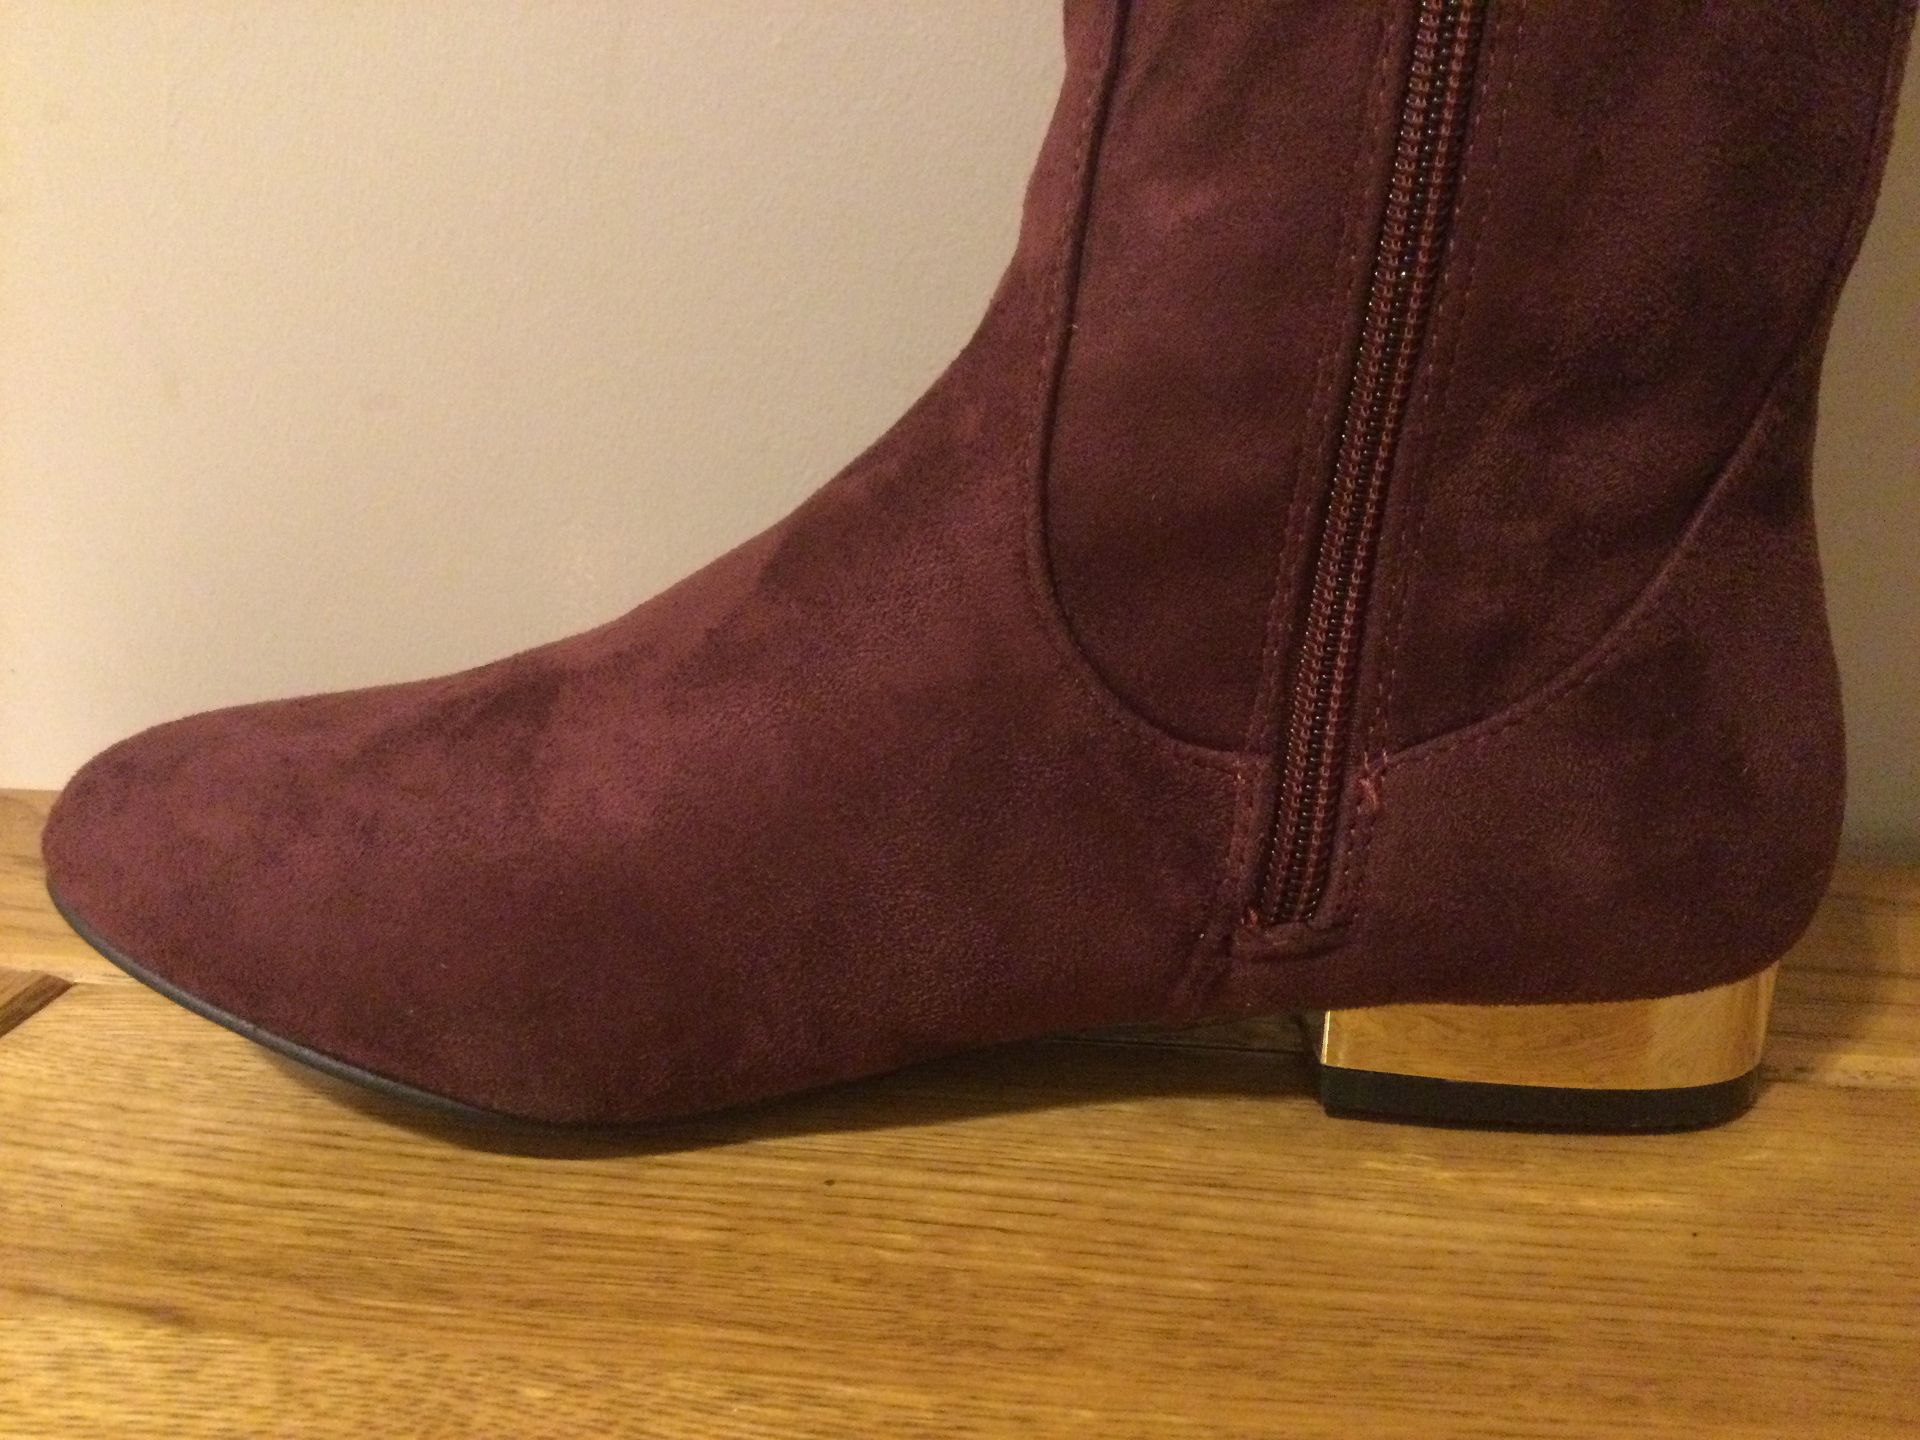 Dolcis “Katie” Long Boots, Low Heel, Size 5, Burgundy - New RRP £55.00 - Image 3 of 7